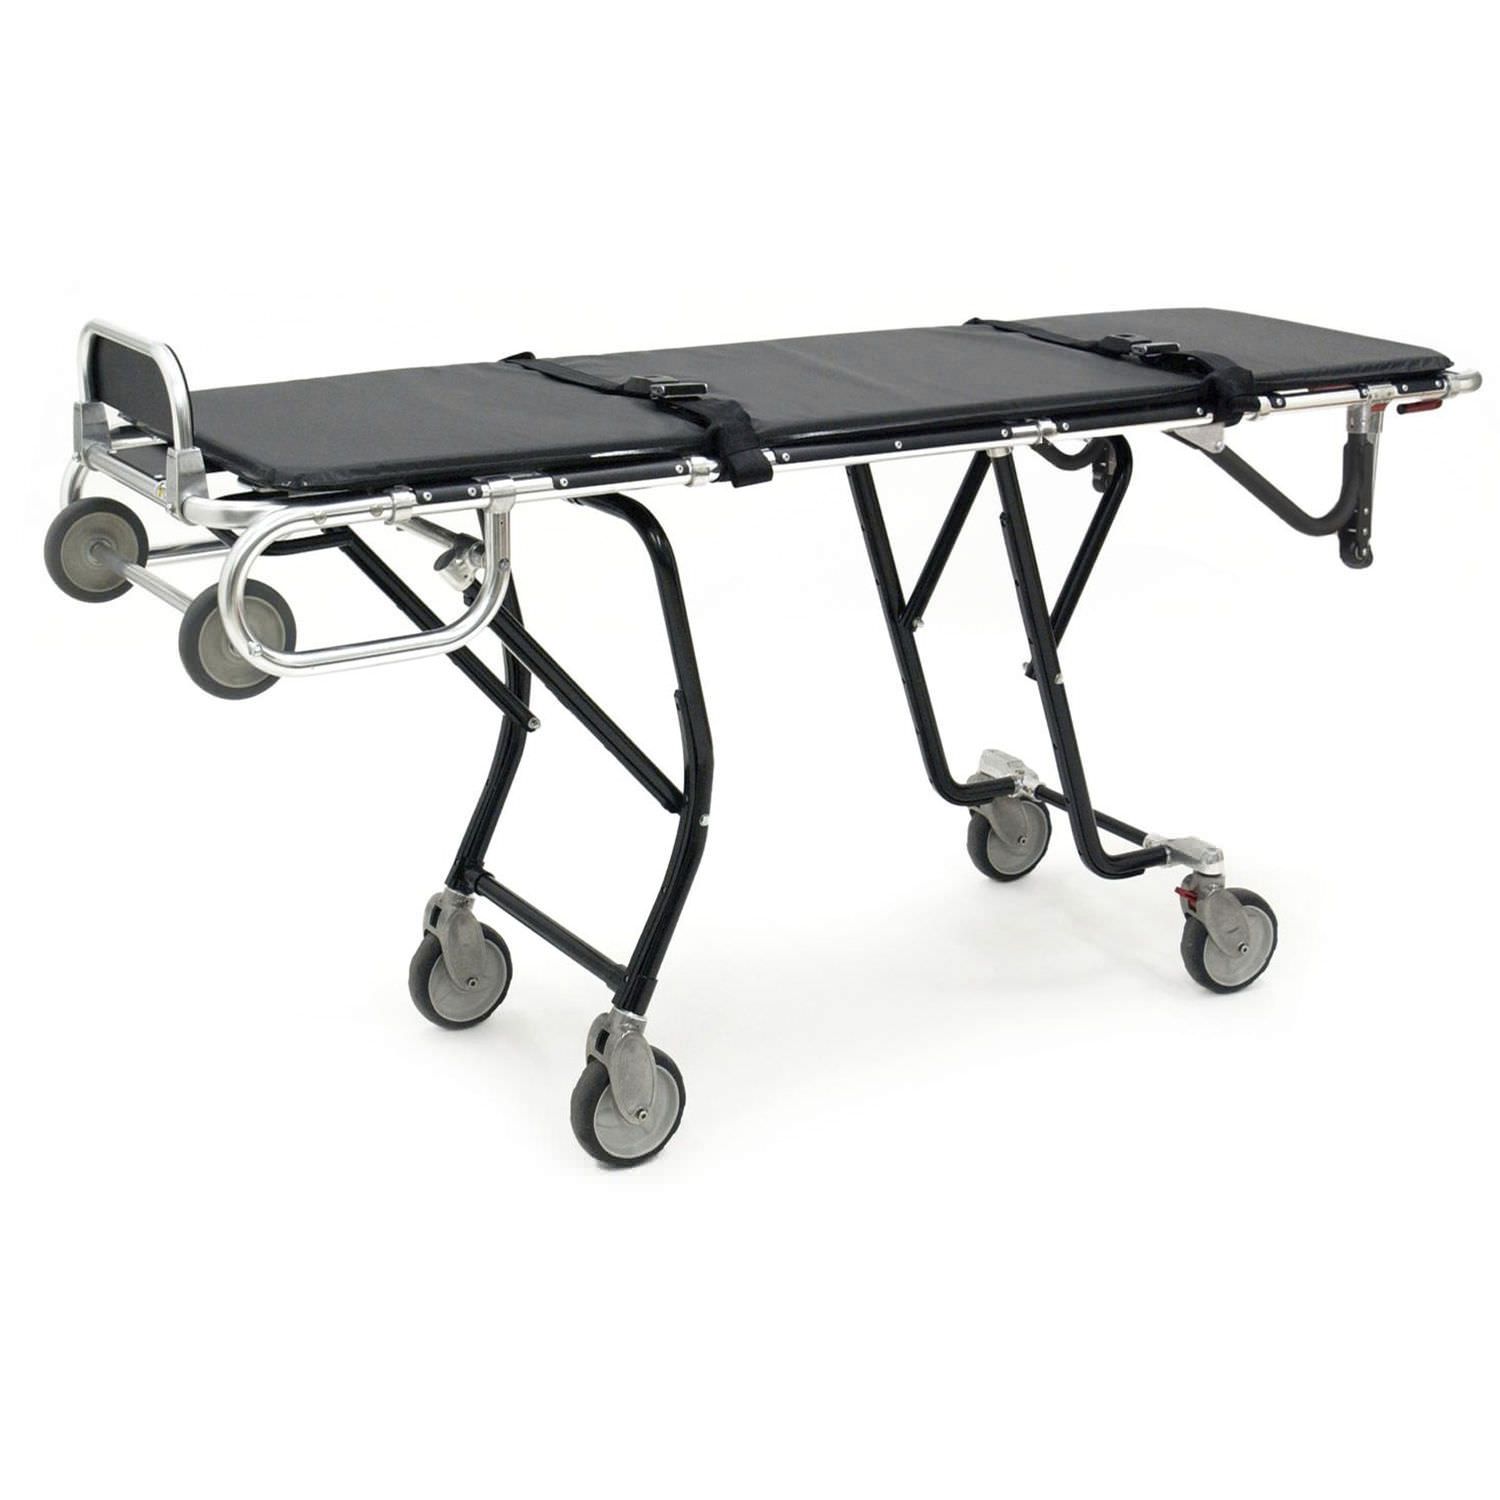 Mortuary stretcher trolley / height-adjustable / mechanical / 1-section 450 kg | Model 24 miniMAXX Ferno (UK) Limited